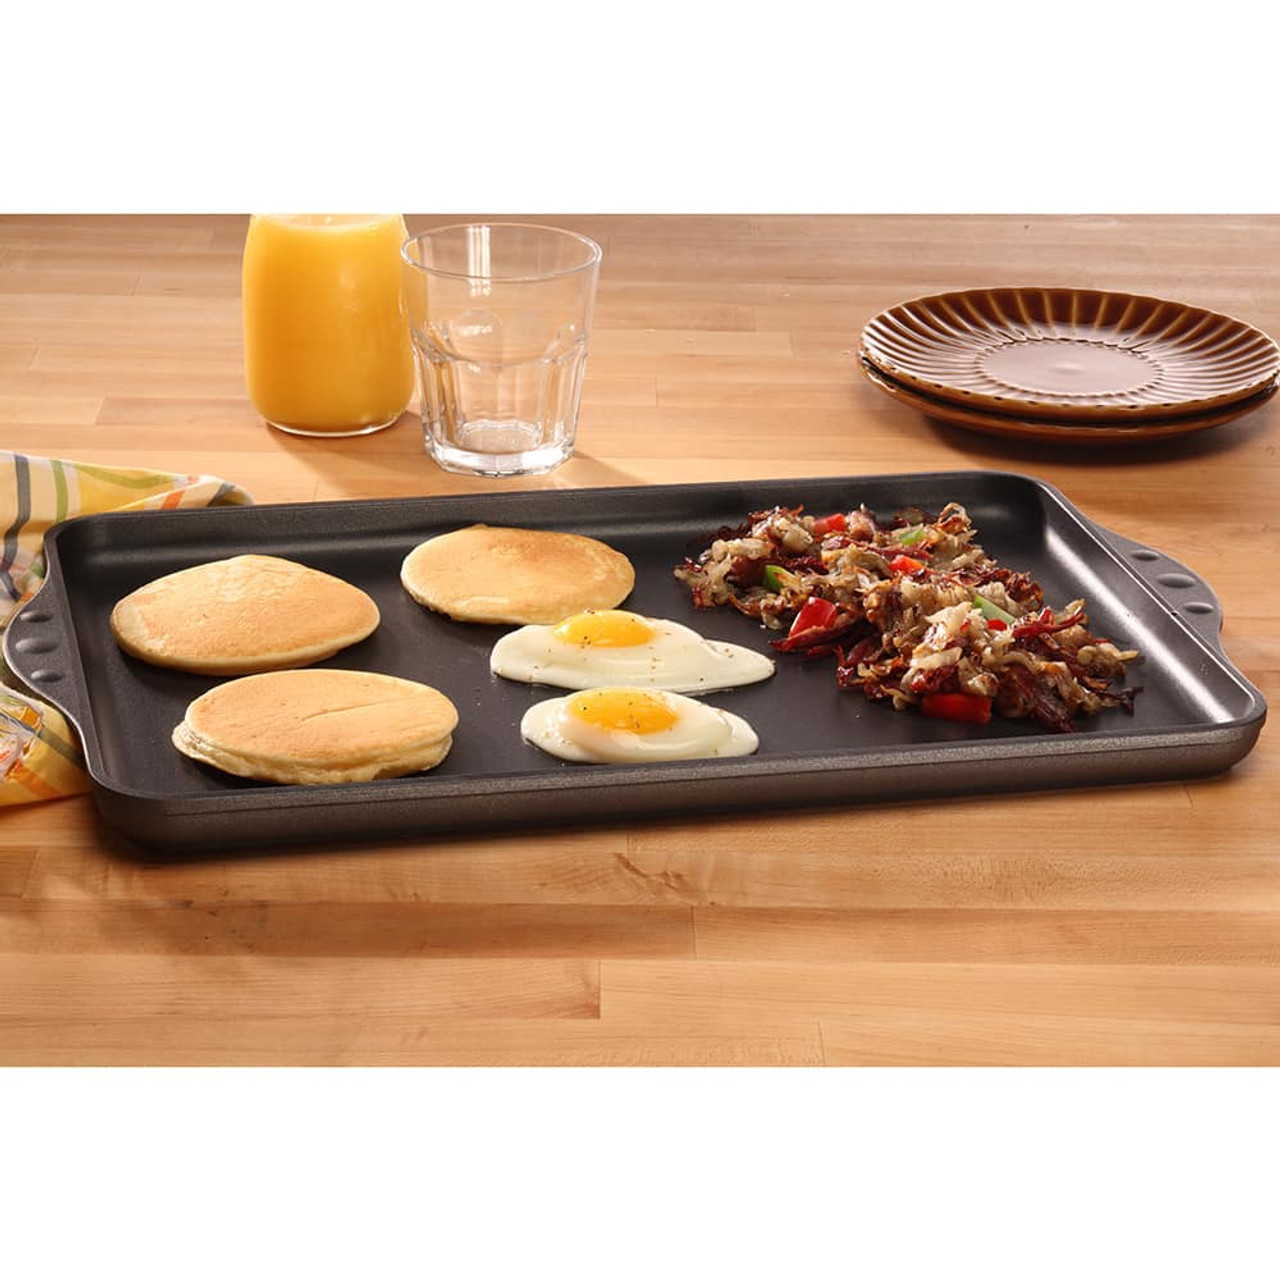 https://cdn11.bigcommerce.com/s-hccytny0od/images/stencil/1280x1280/products/462/2714/swiss-diamond-nonstick-double-burner-griddle-1__98426.1586792100.jpg?c=2?imbypass=on